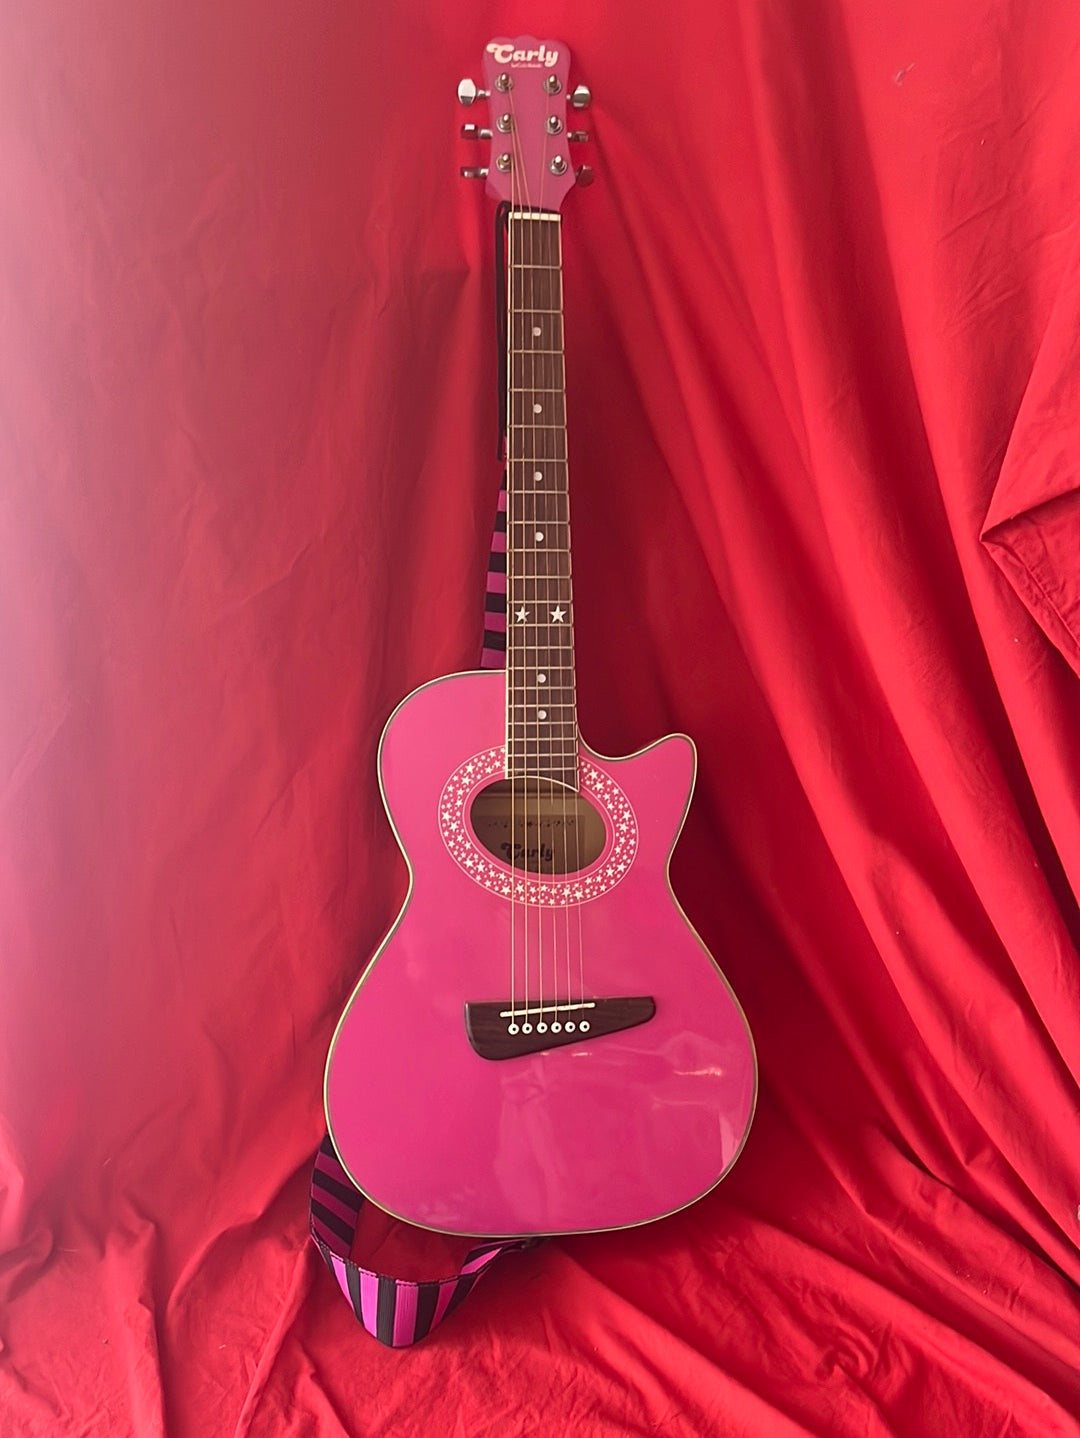 CARLO ROBELLI "Carly" Pink Youth Guitar with Matching Strap and Blue Gig Bag